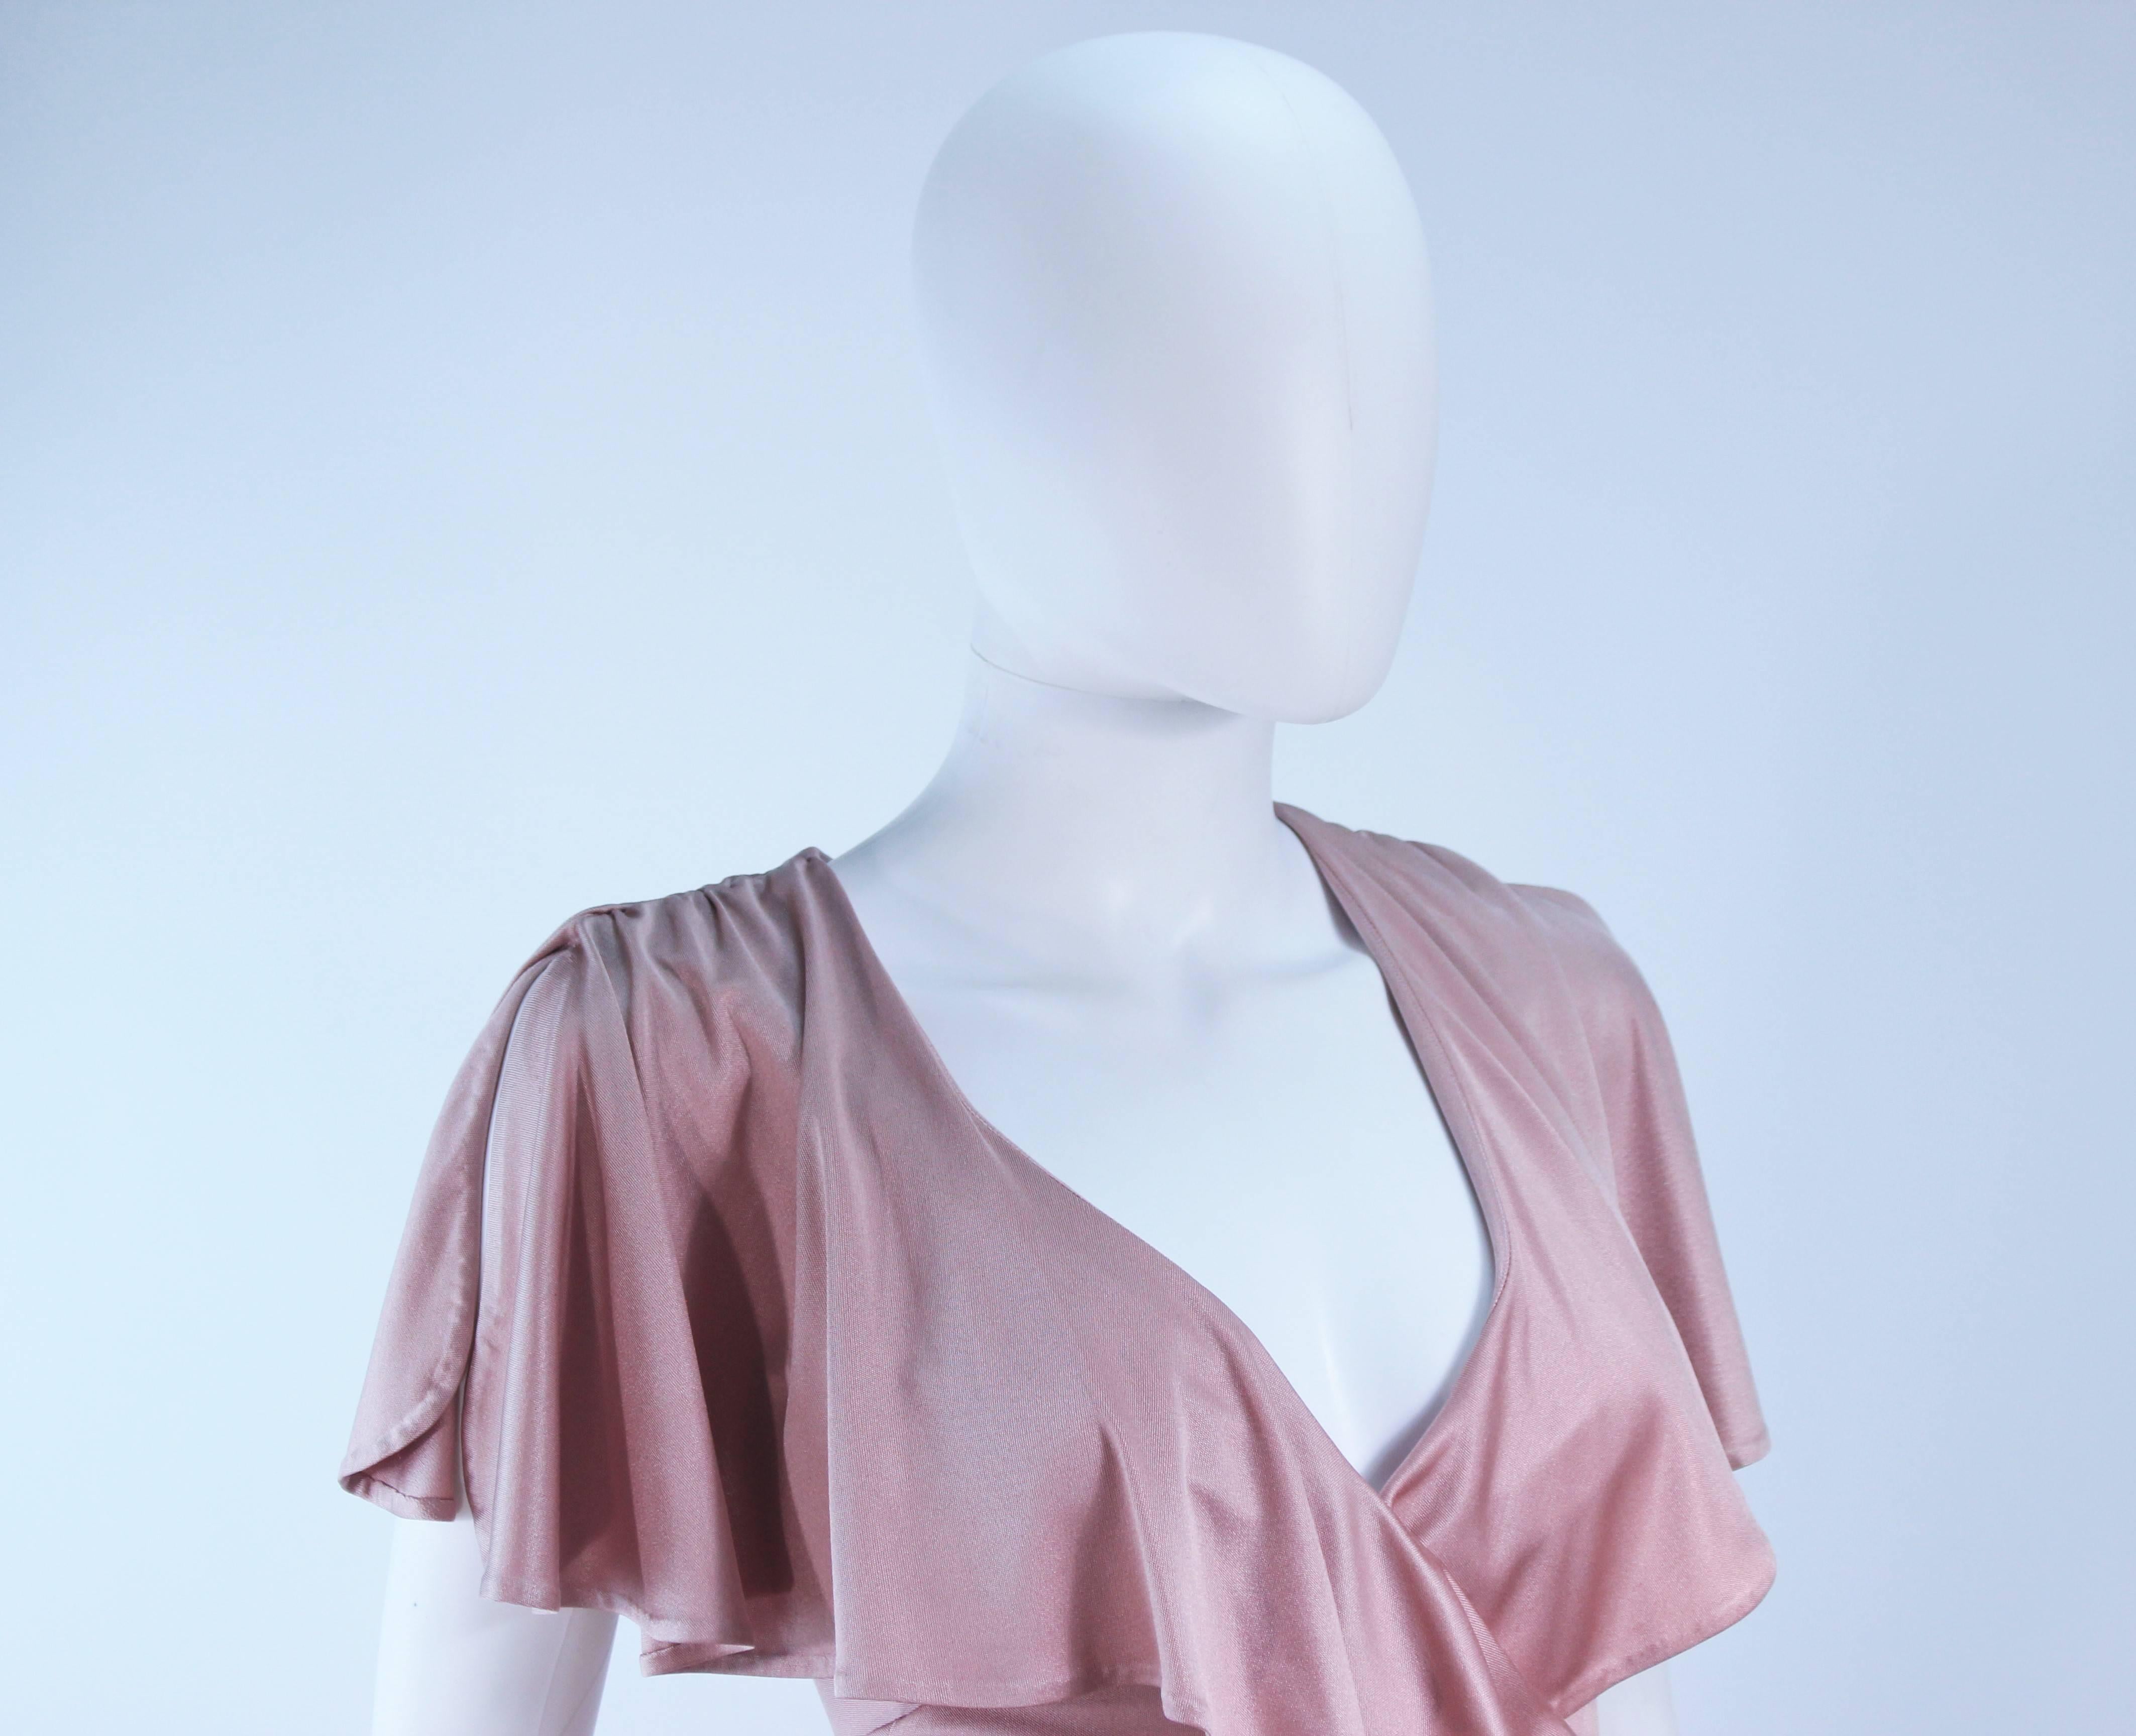 ELIZABETH MASON COUTURE Blush Silk Jersey Ruffled Cocktail Dress Made to Order For Sale 1